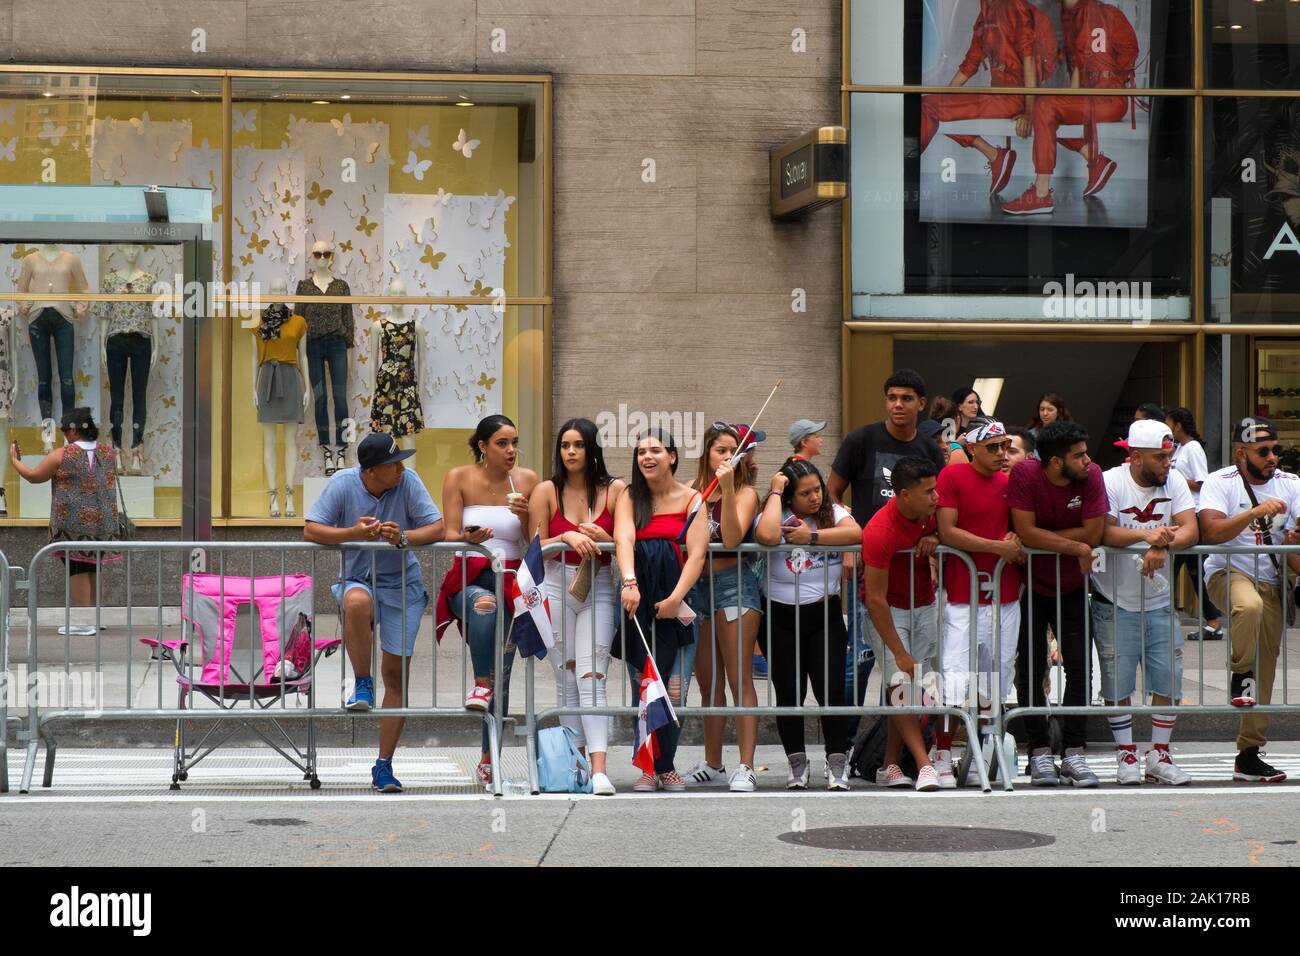 People celebrate during the Dominican Day Parade in Manhattan, New York, USA Stock Photo